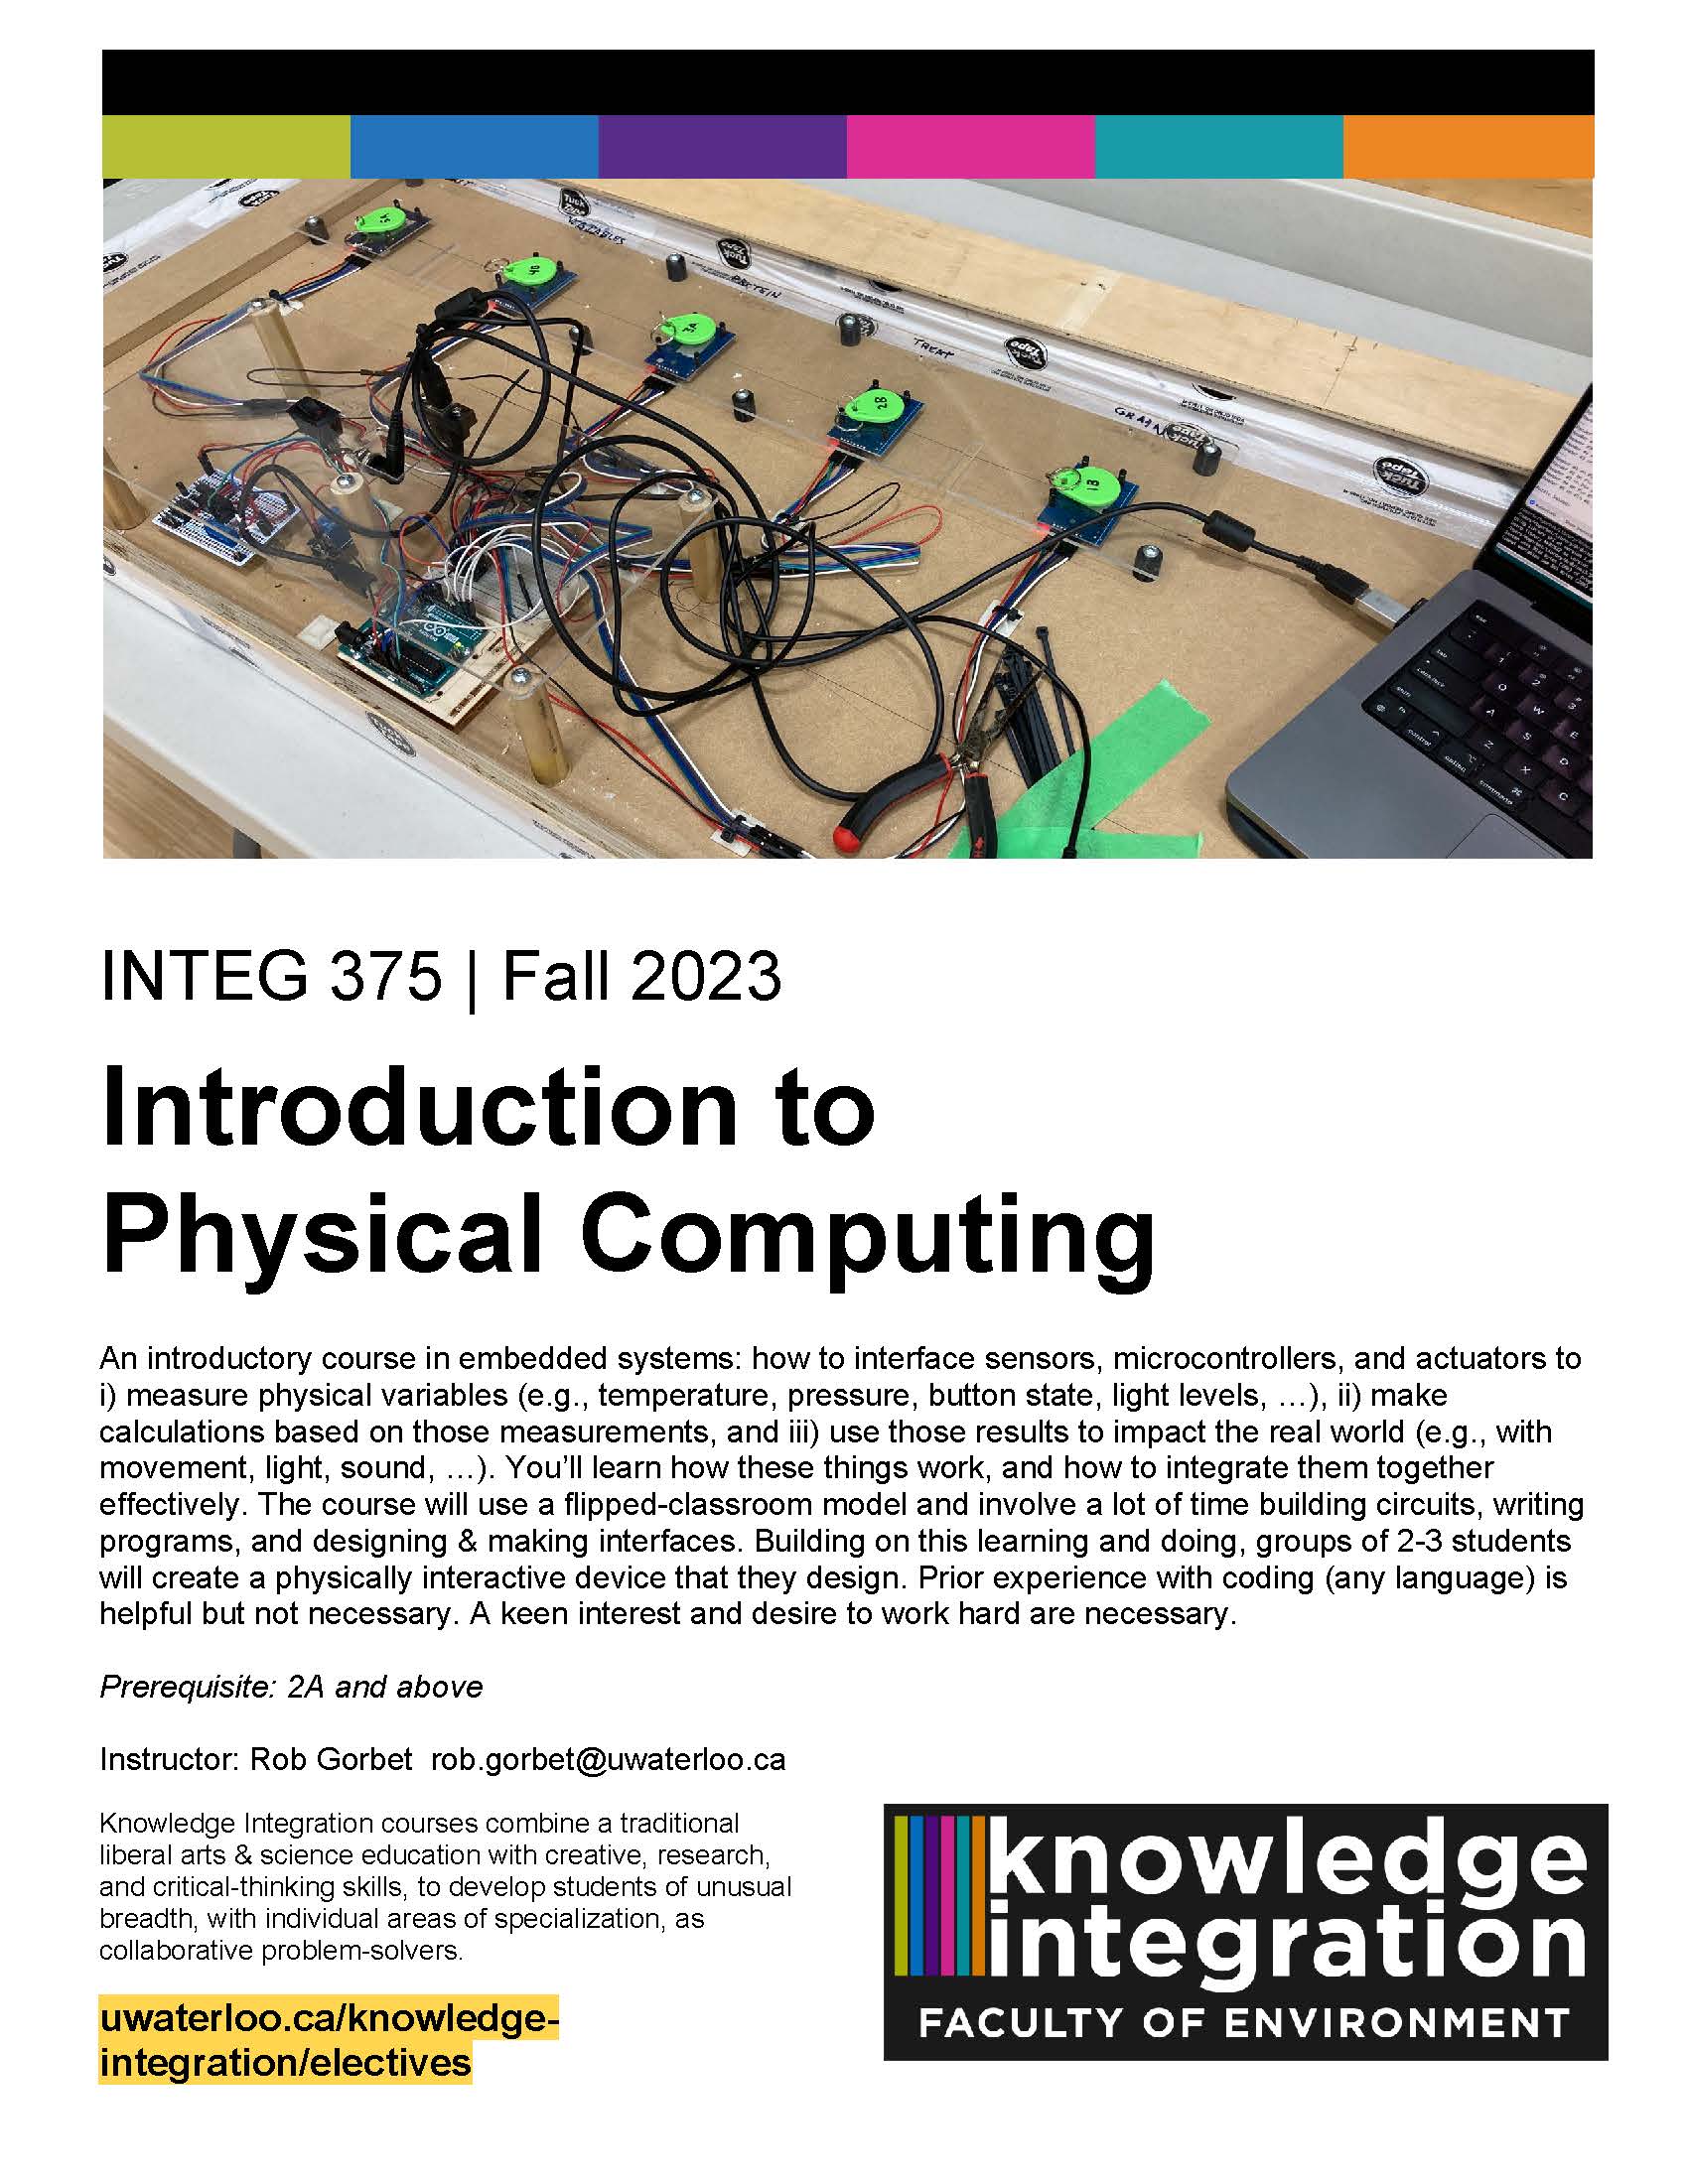 Introduction to Physical Computing